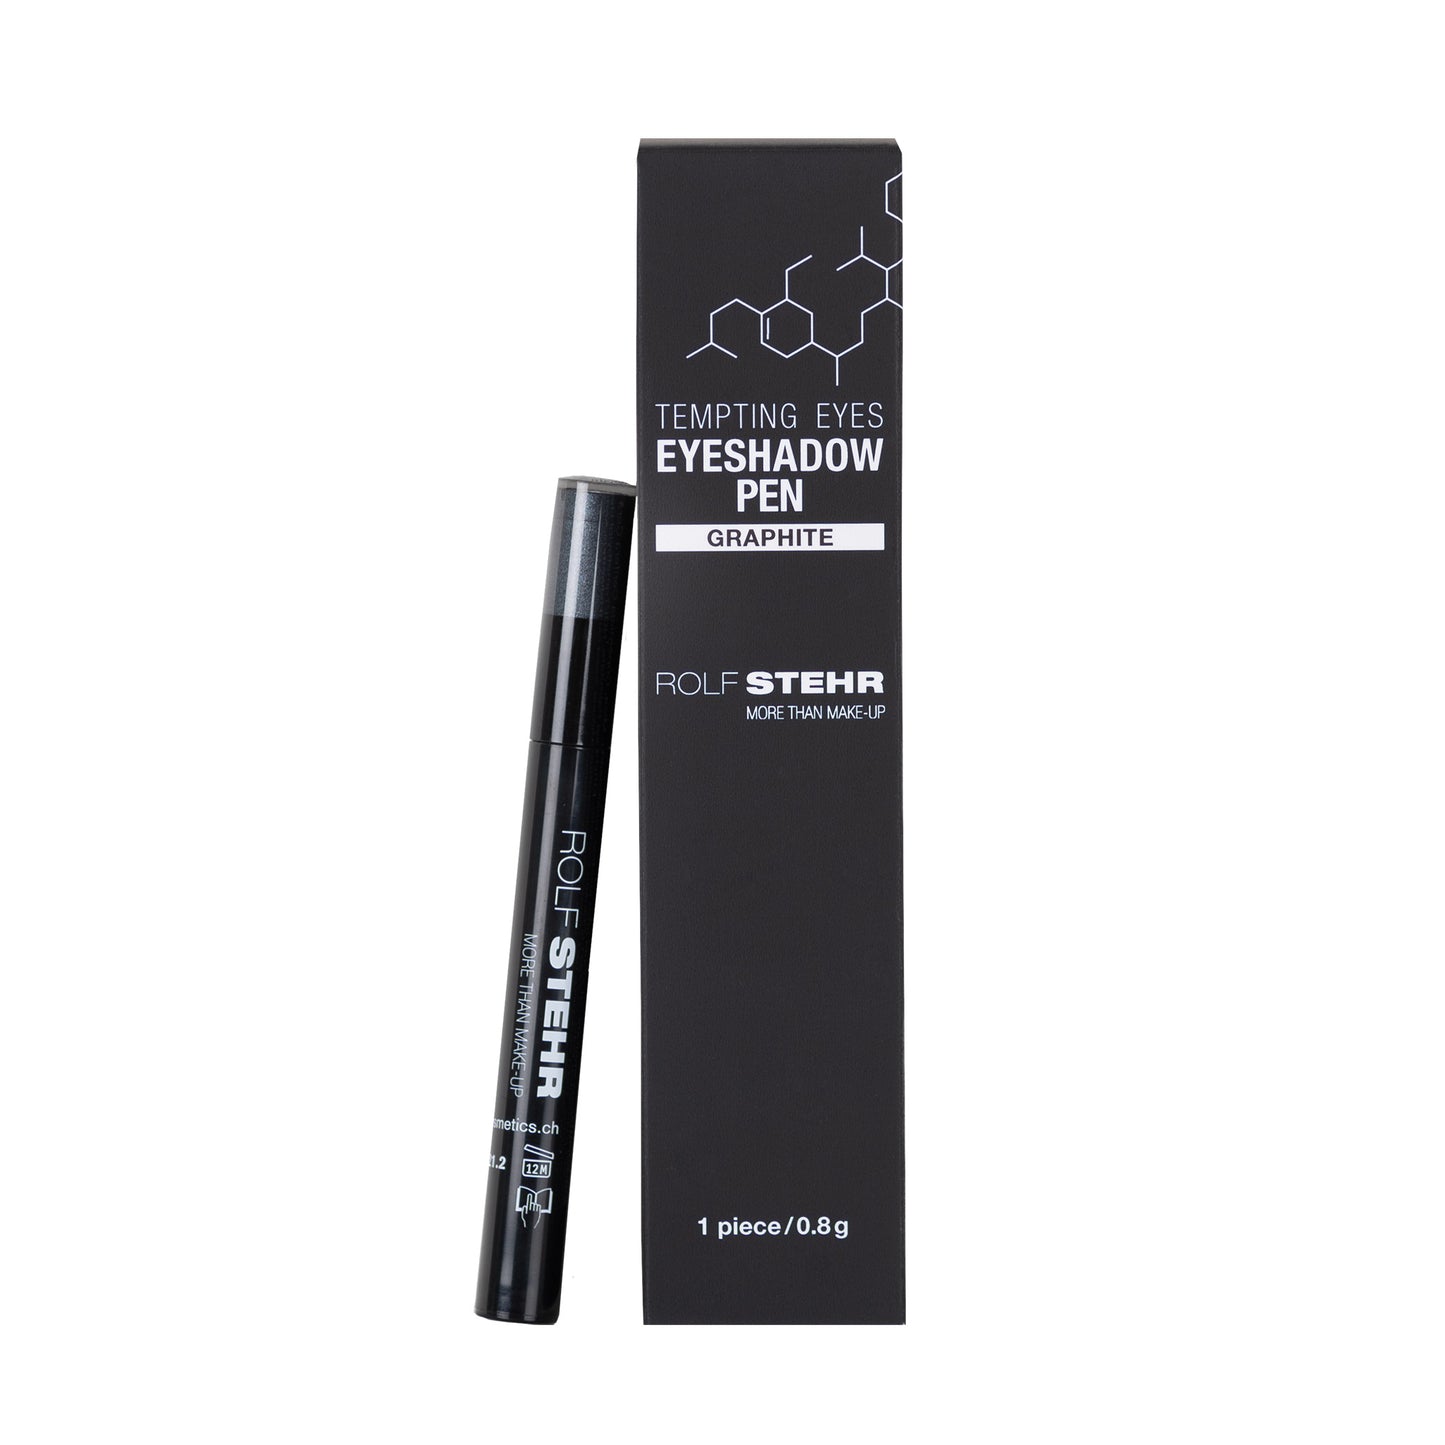 Eyeshadow Pen - Graphite <br> More than Make up